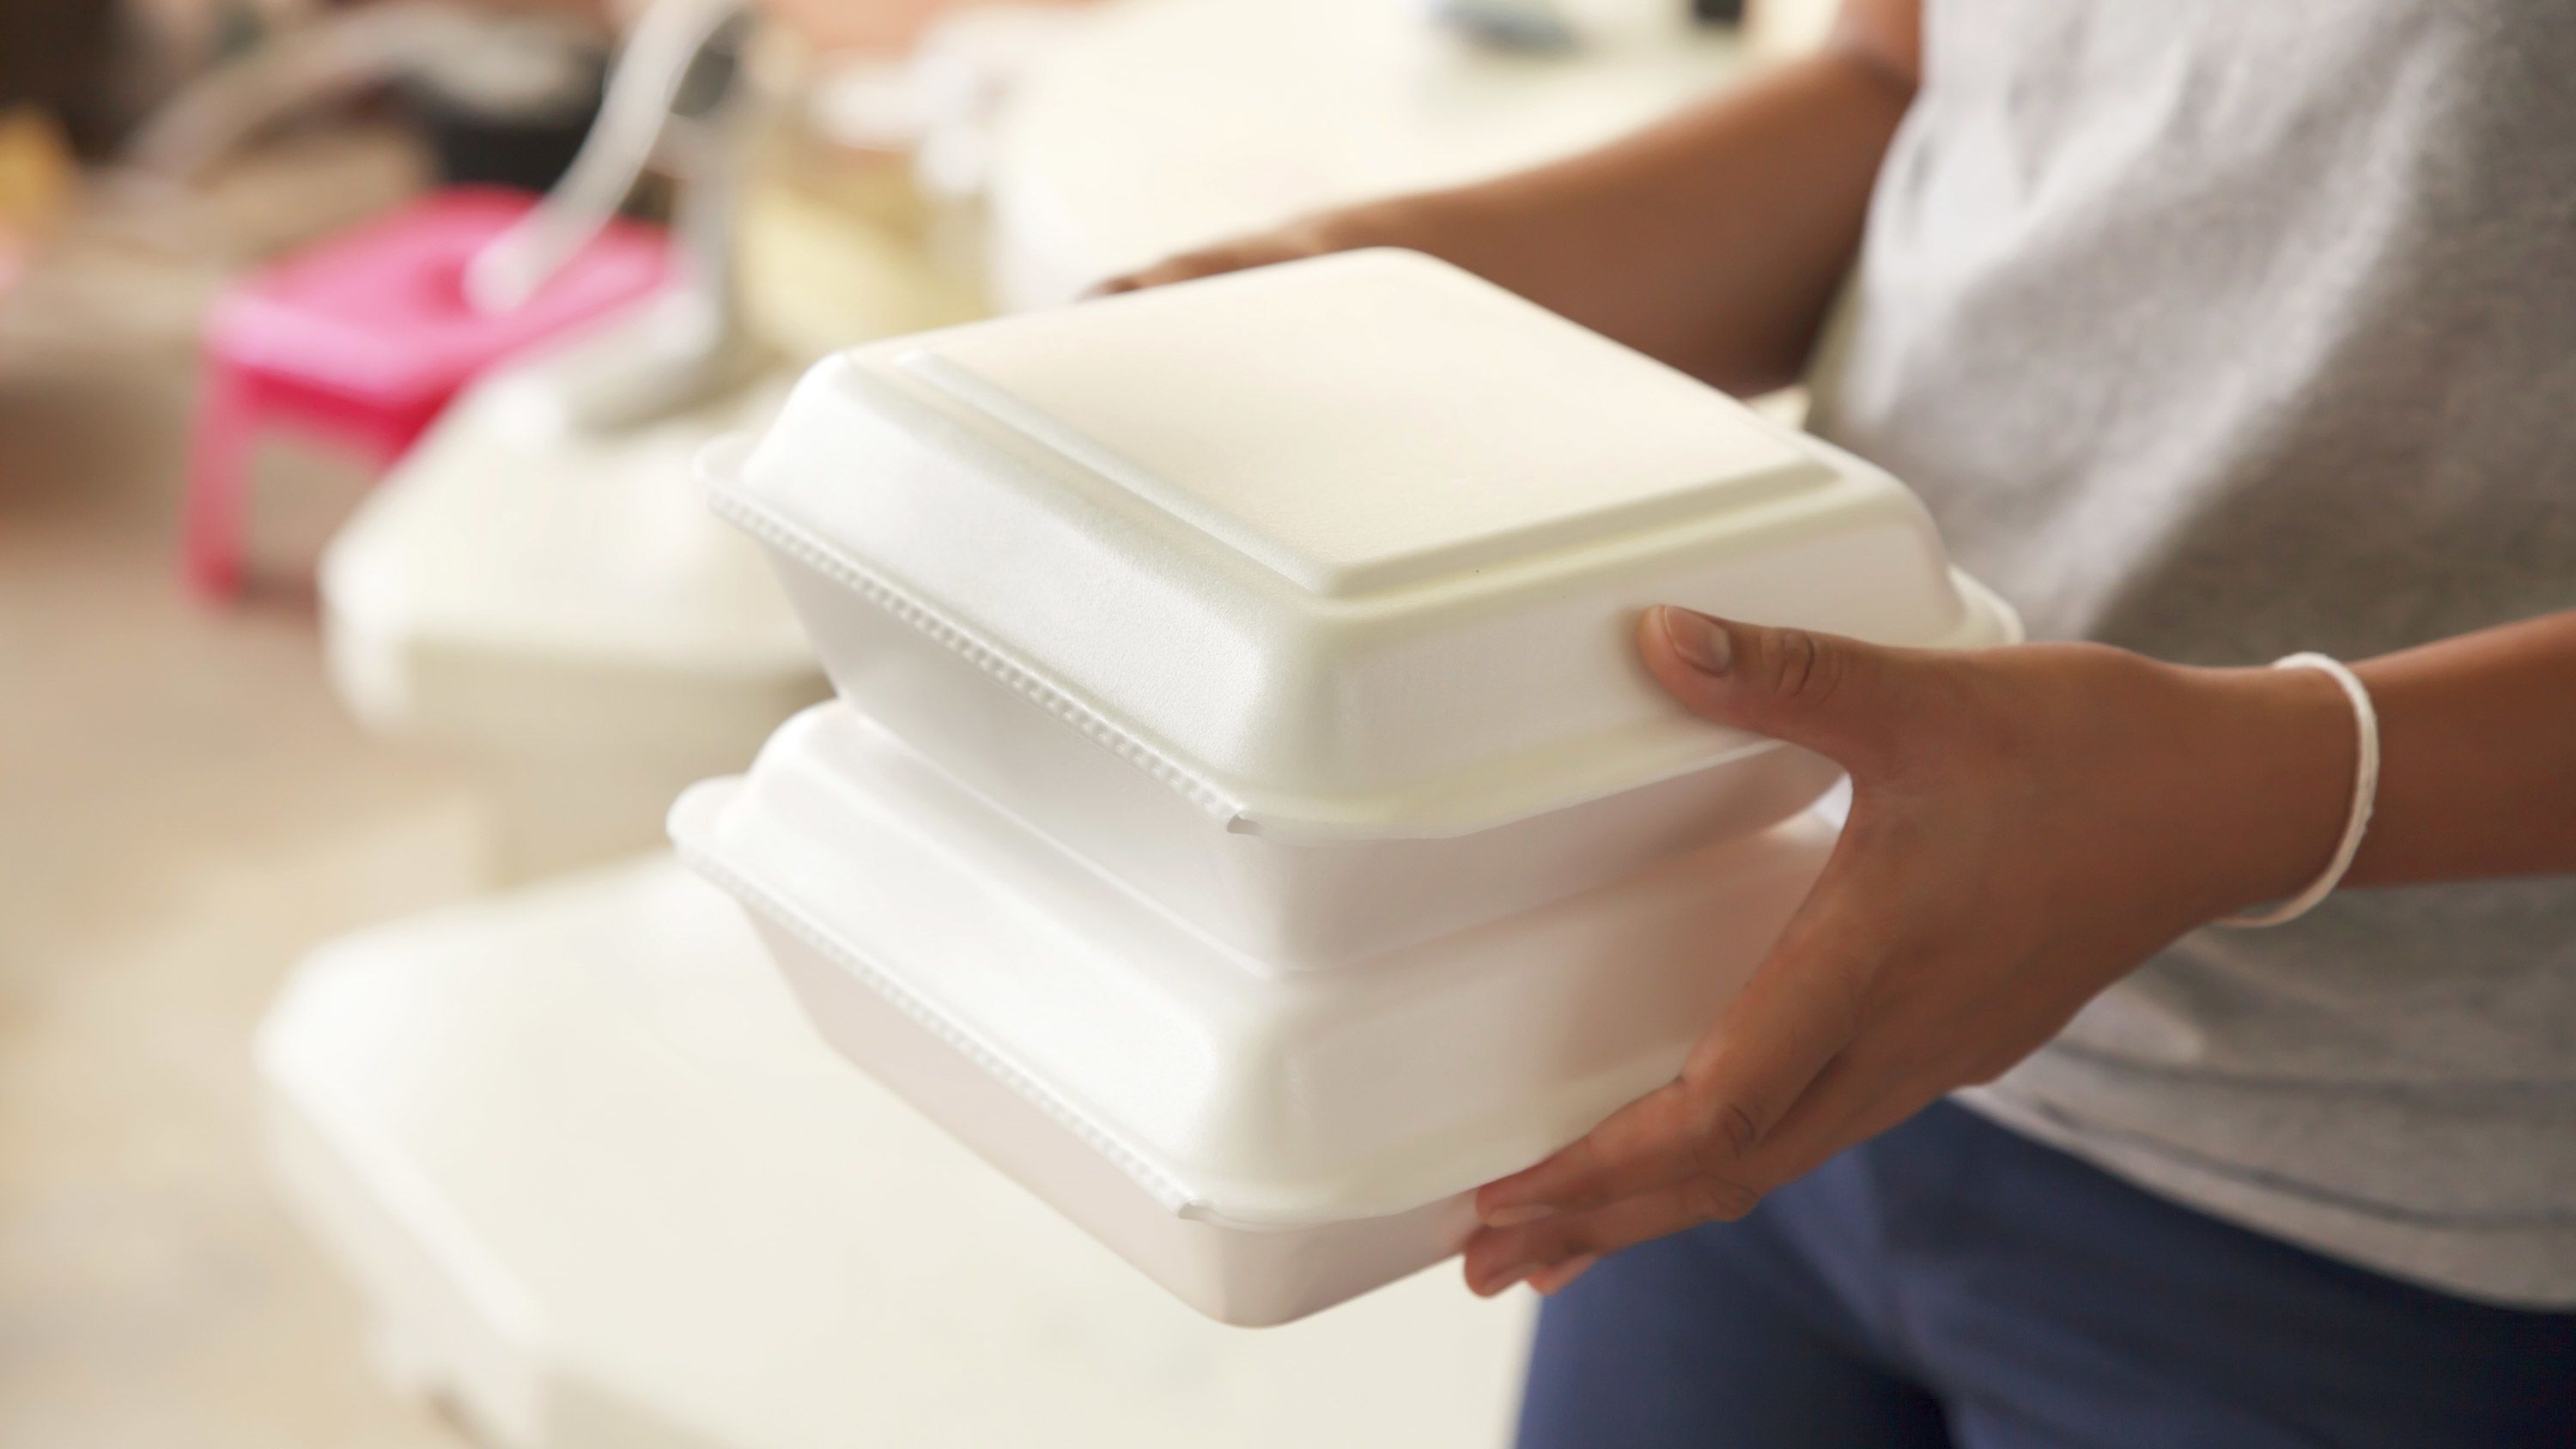 New Jersey considering a ban on styrofoam containers in schools - WHYY